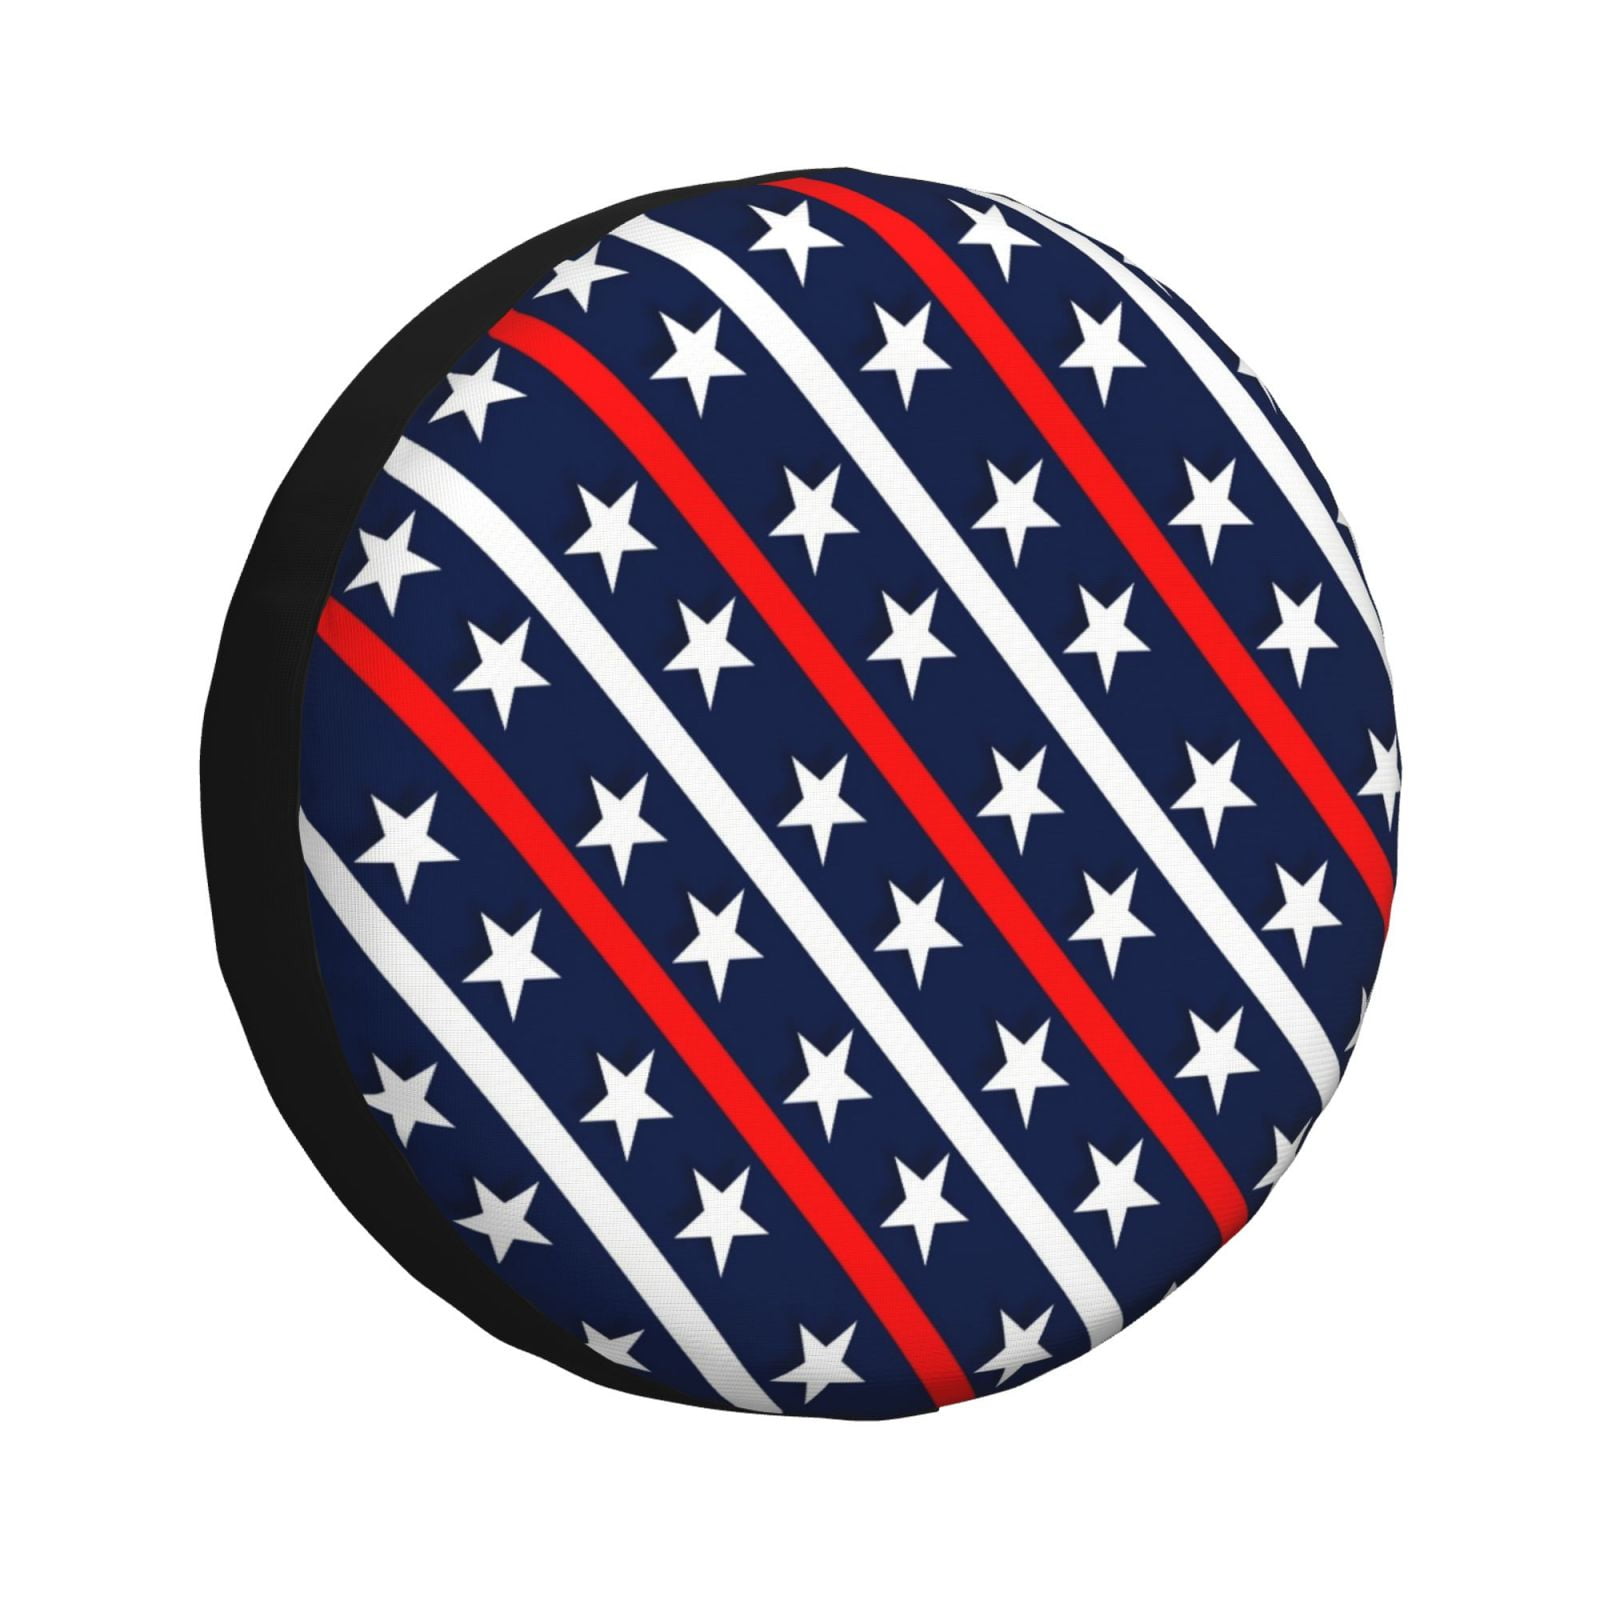 DouZhe Waterproof Spare Tire Cover, Patriotic Red White Blue Stars Strips  Prints Adjustable Wheel Covers Fit for Jeep Trailer RV SUV Car, 15 inch 